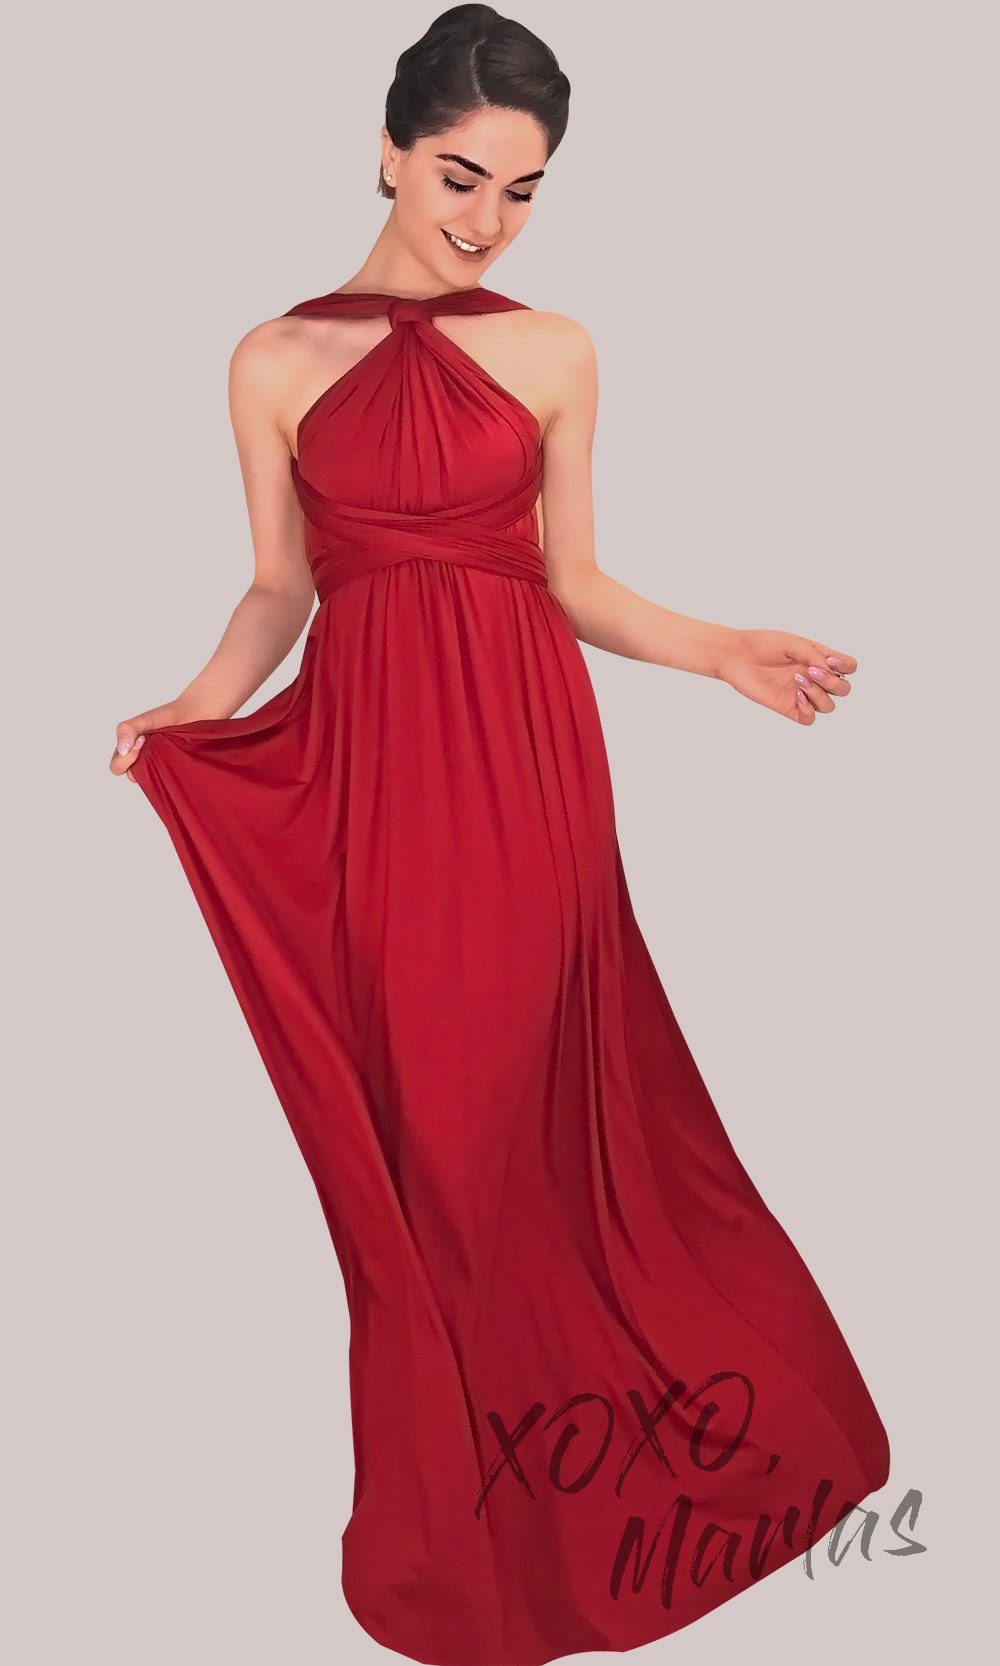 BLong red infinity bridesmaid dress or multiway dress or convertible dress.One dress worn in multiple ways.This red one size dress is great for bridesmaid, prom, destination wedding, gala, cheap western party dress, semi formal, cocktail, gala, formal